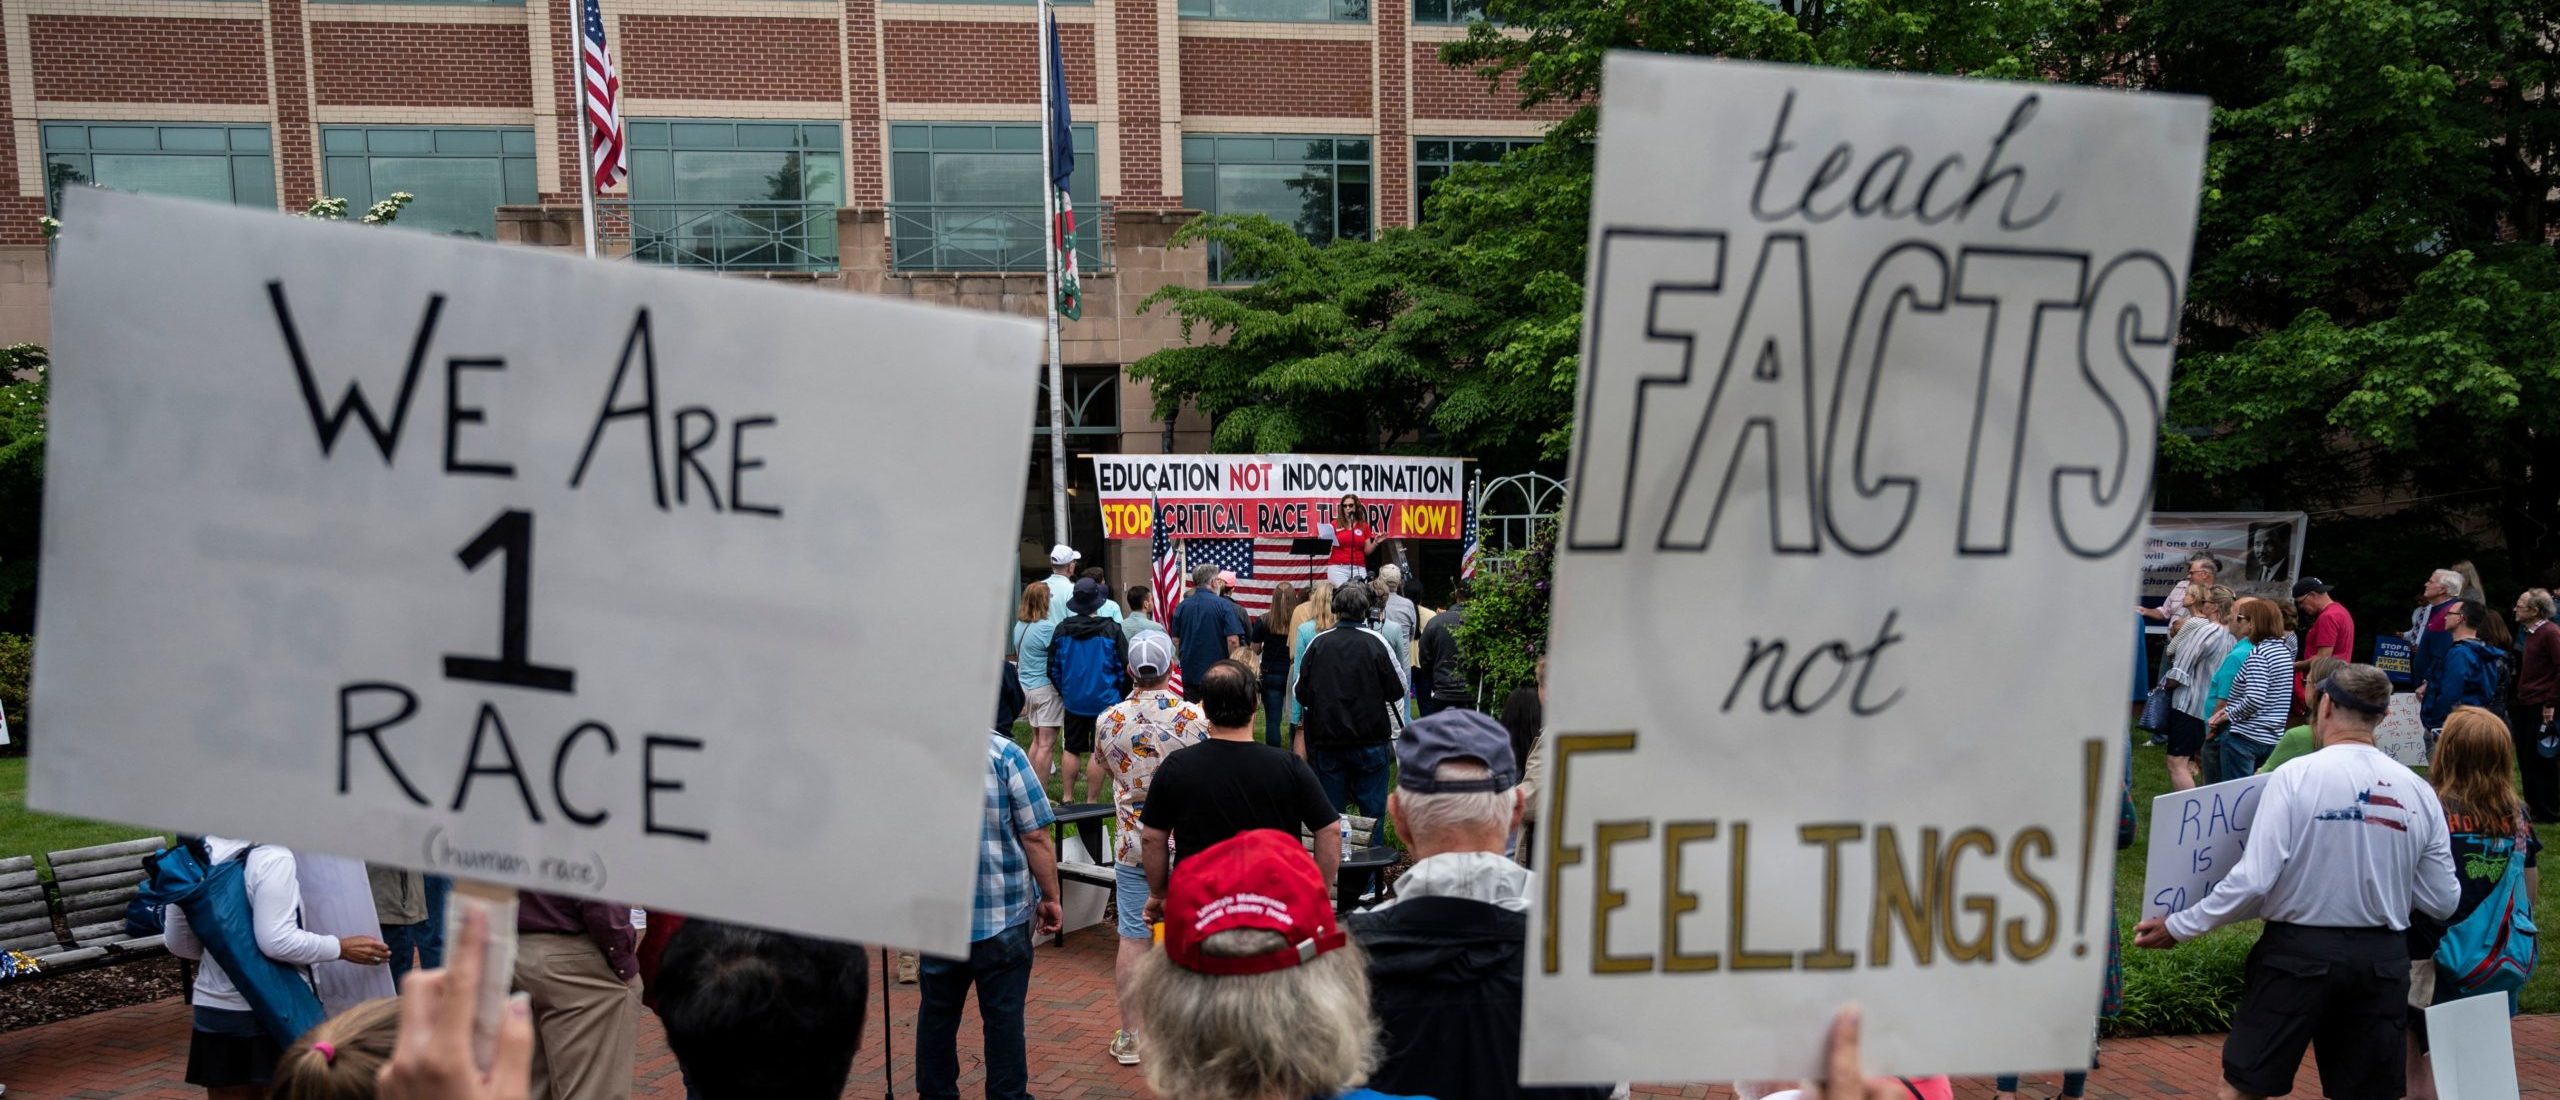 People hold up signs during a rally against "critical race theory" (CRT) being taught in schools at the Loudoun County Government center in Leesburg, Virginia on June 12, 2021. (Photo by ANDREW CABALLERO-REYNOLDS/AFP via Getty Images)